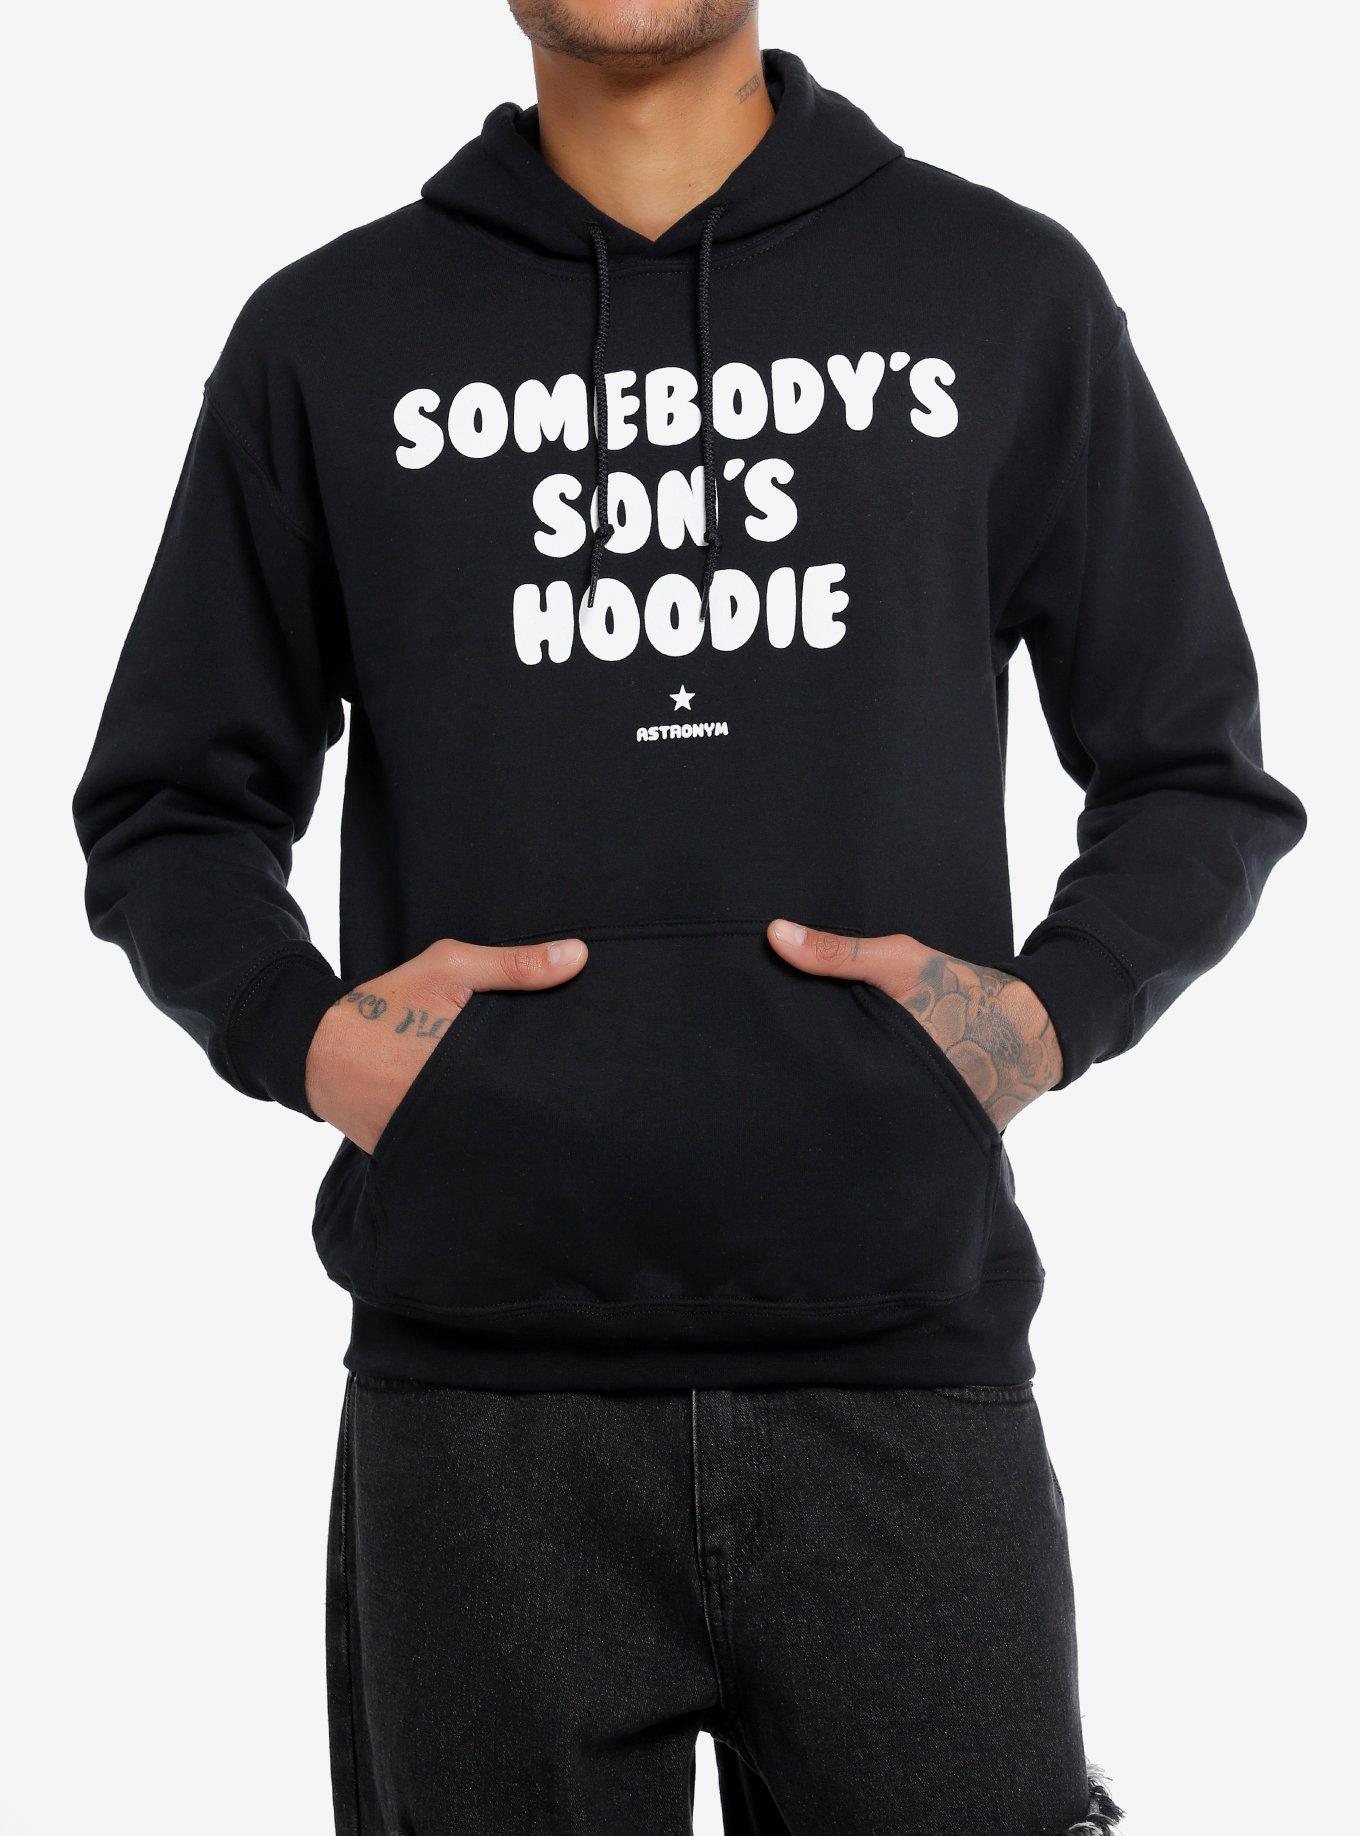 Somebody's Son's Hoodie By Astronym